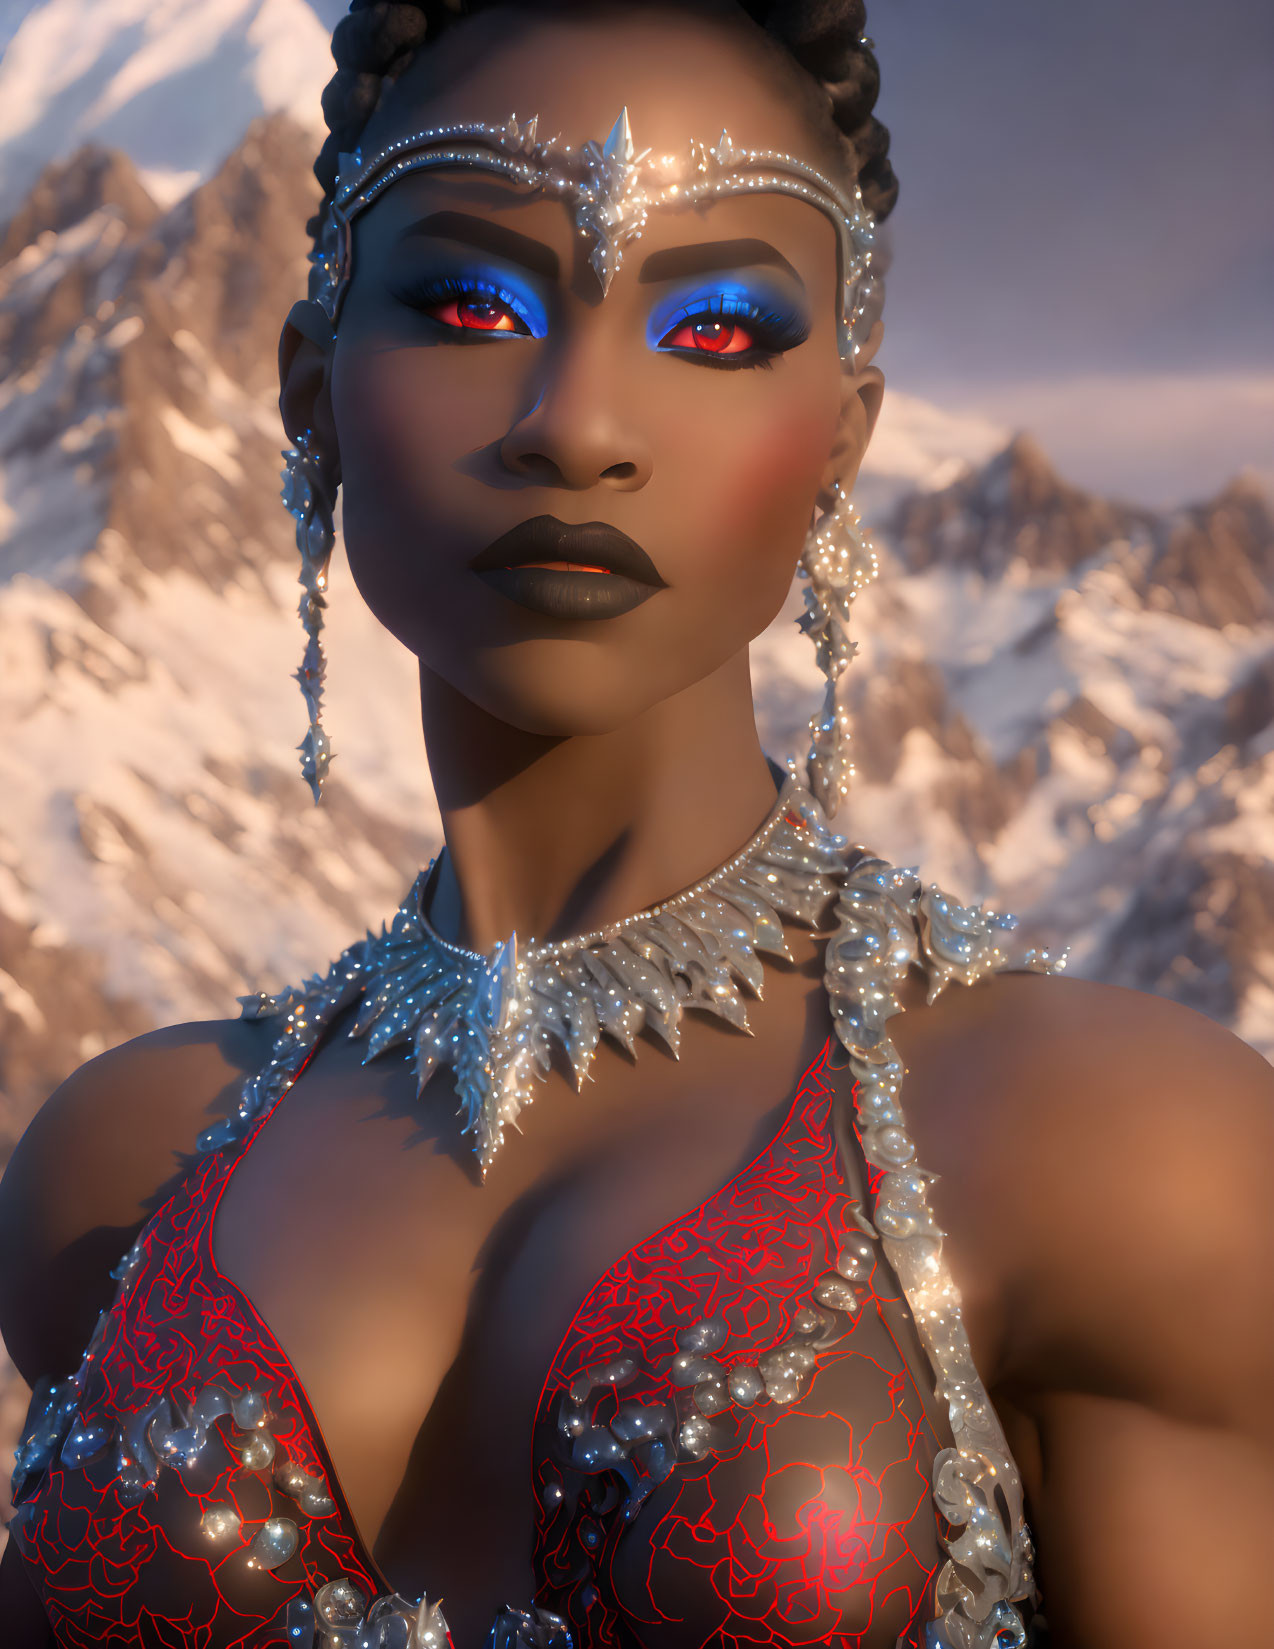 Digital portrait of woman with striking jewelry and makeup in snowy mountain backdrop